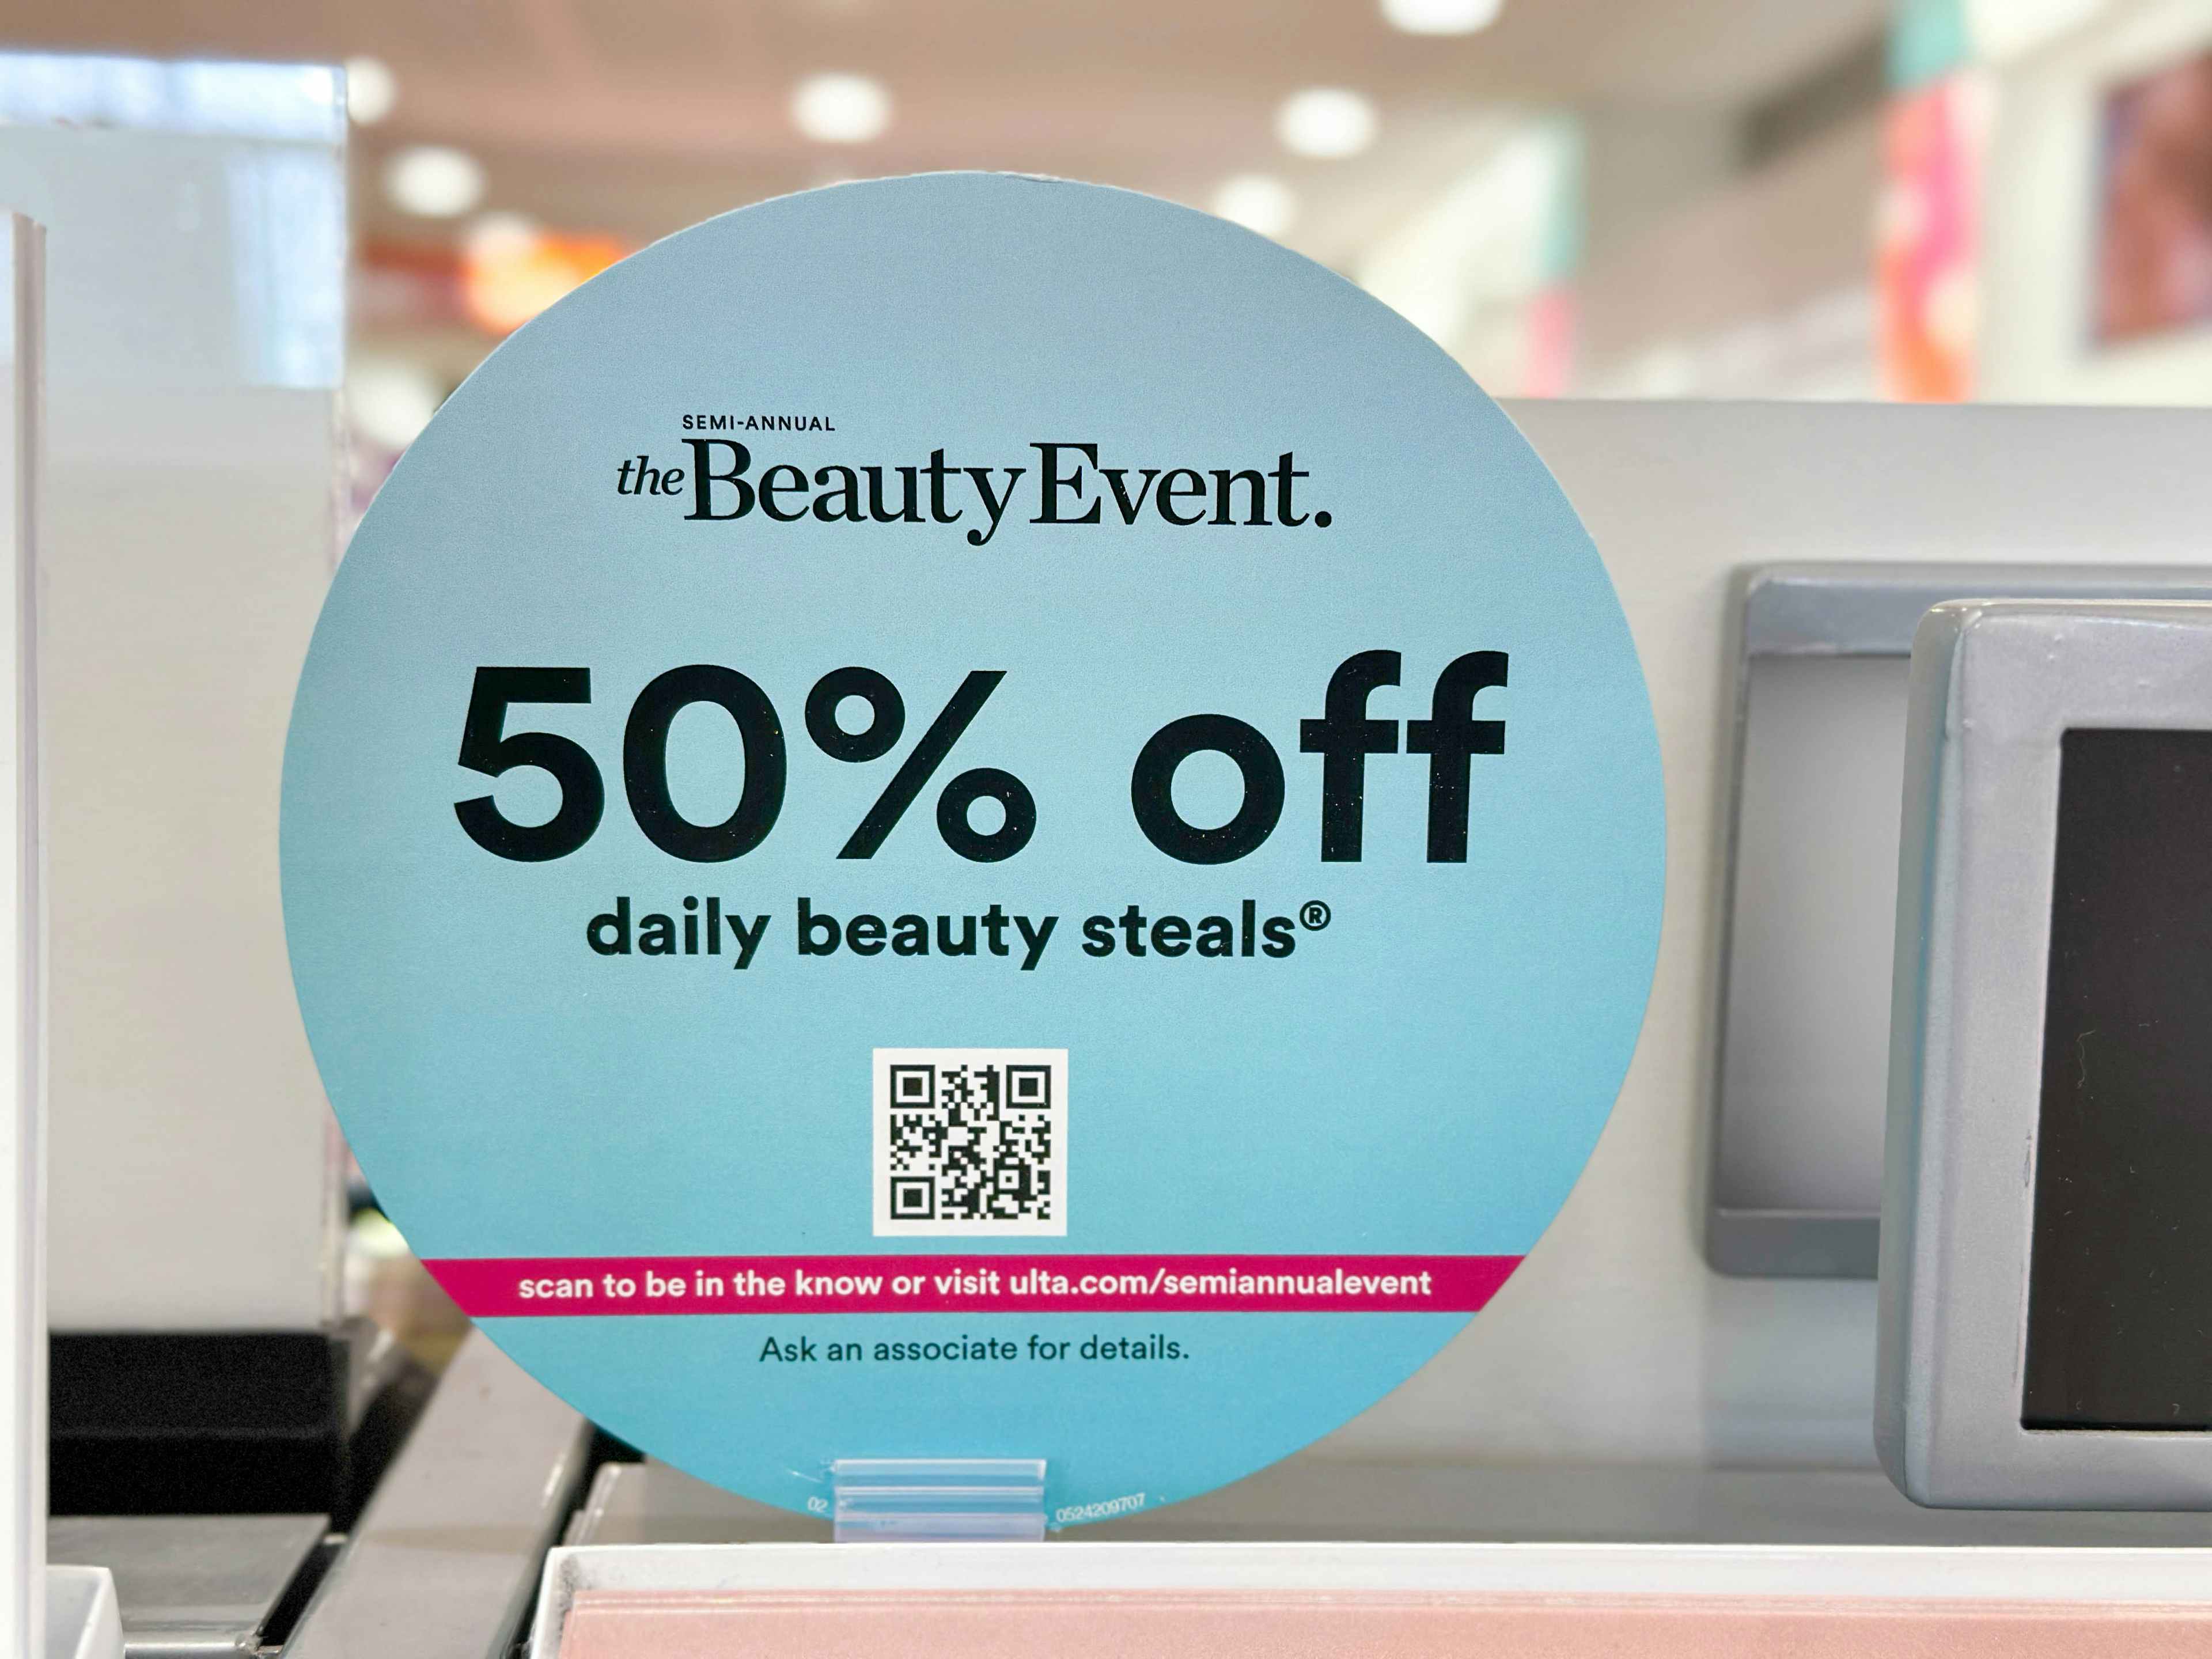 ulta-store-the-beauty-event-signage-kcl-50-off-sale